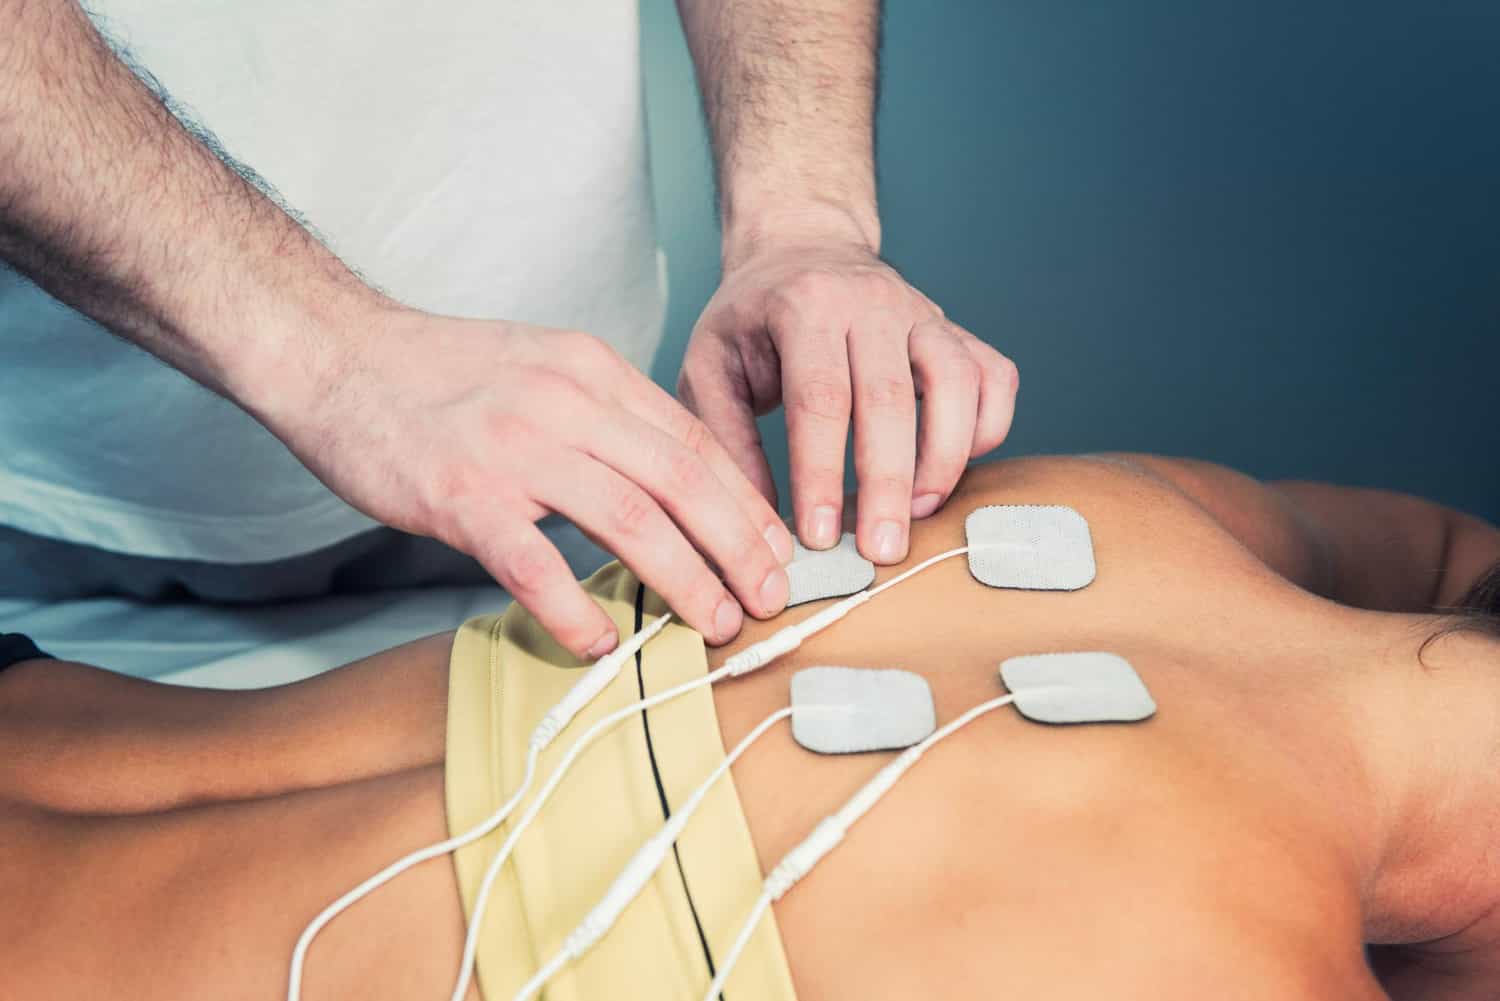 Electrical stimulation therapy